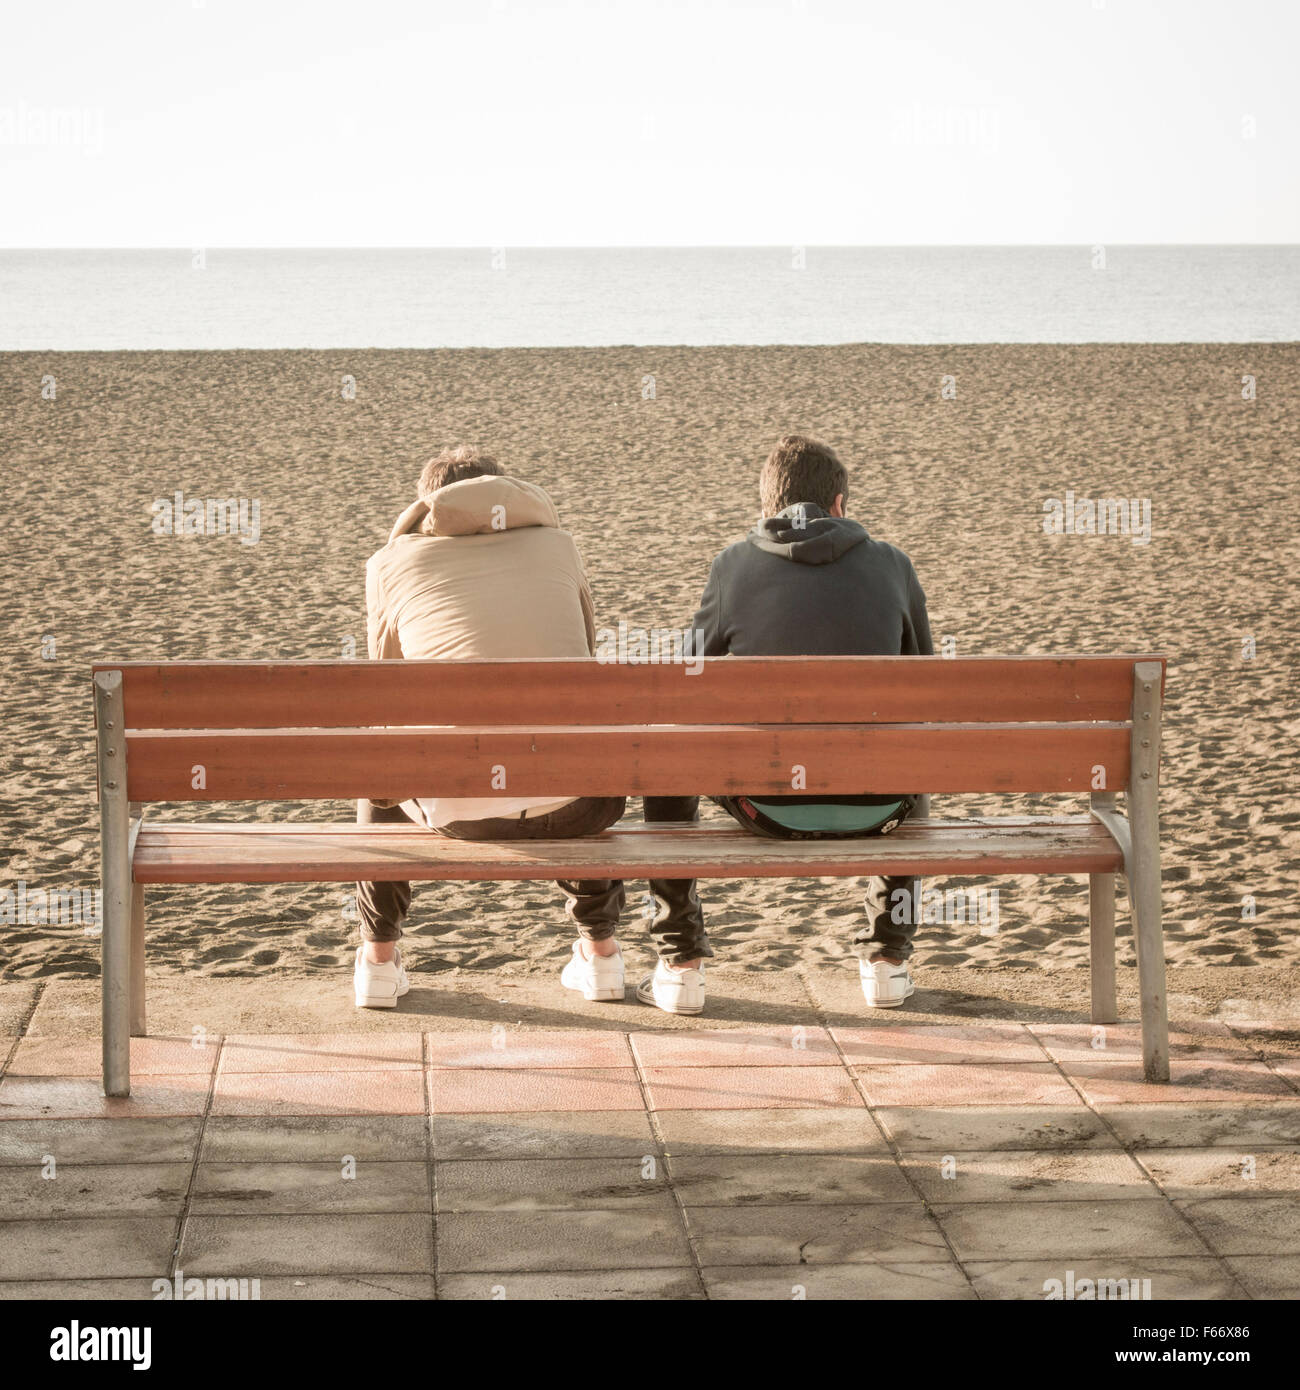 Two teenagers sitting on bench overlooking beach. Stock Photo